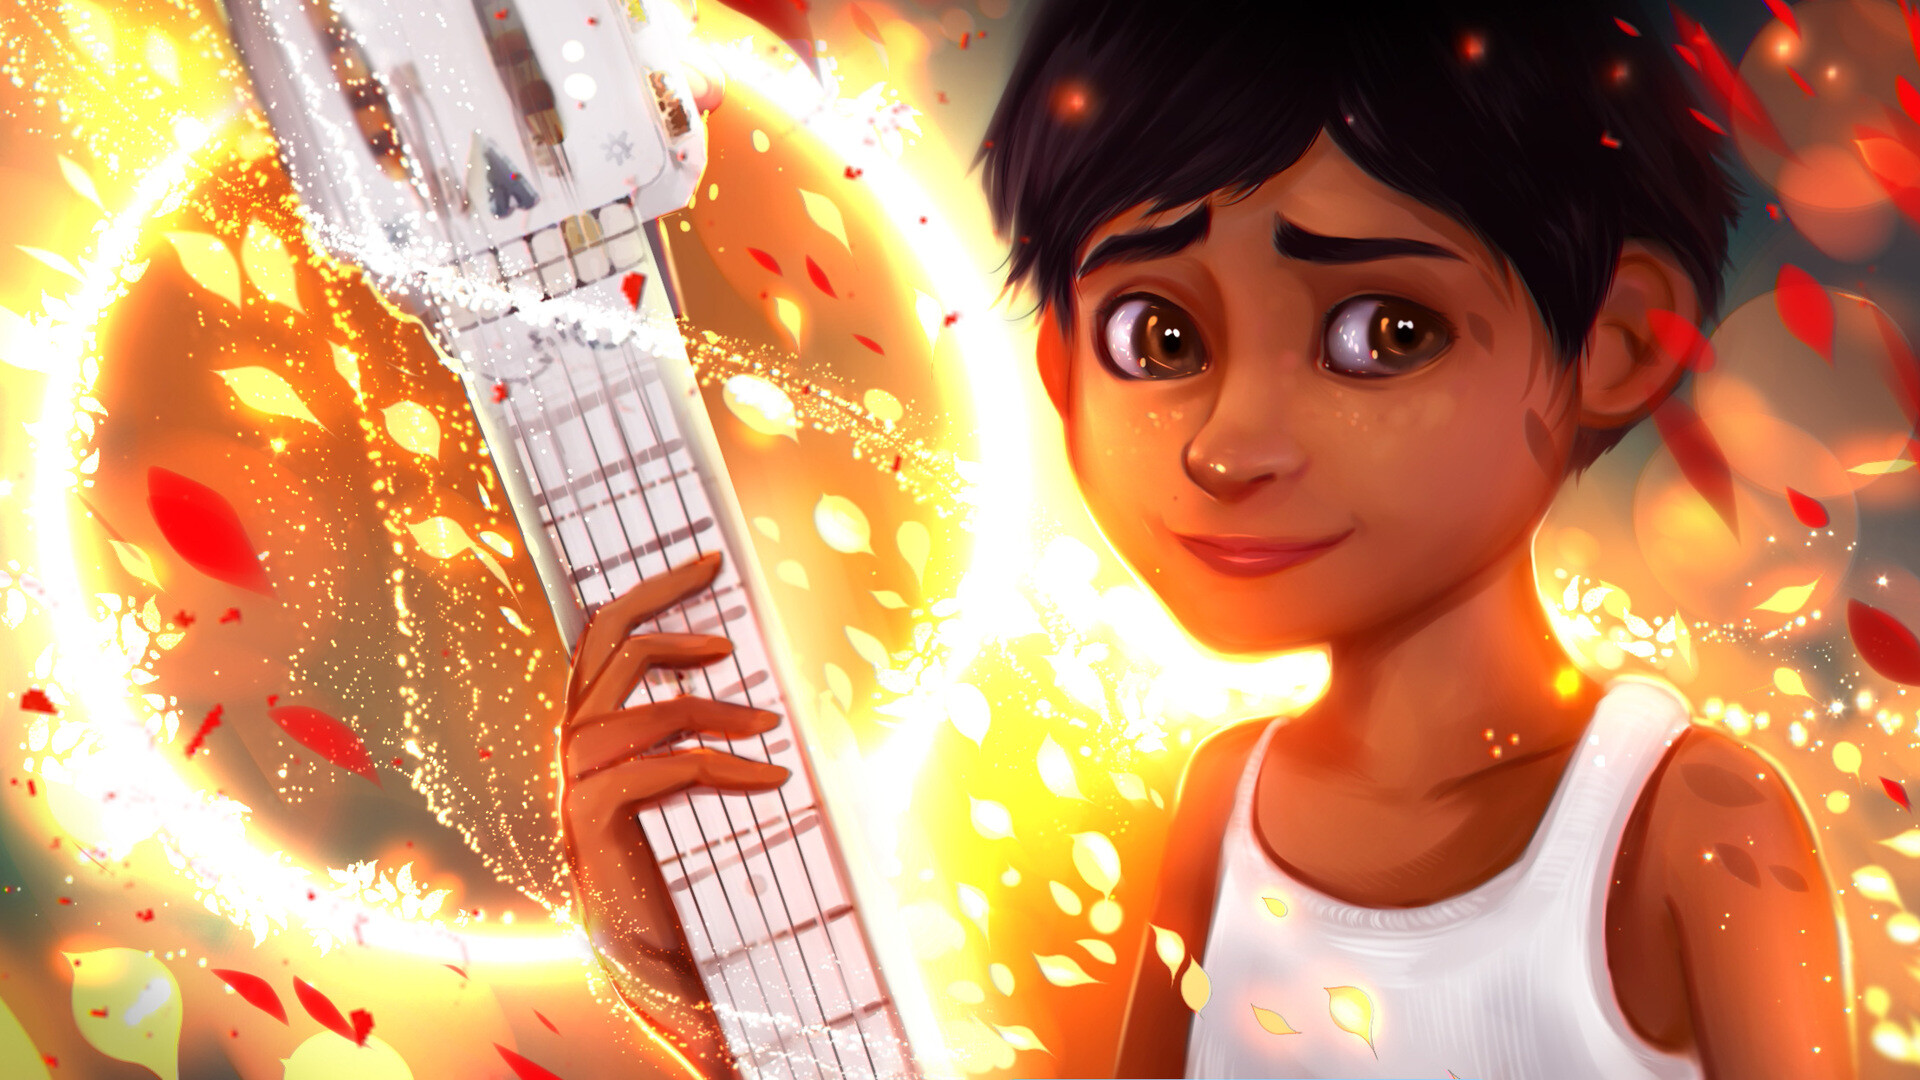 Coco (Cartoon): Twelve-year-old Miguel Rivera is a descendant of a family of shoemakers but has no desire to partake in the family business, Art, Animated film. 1920x1080 Full HD Wallpaper.